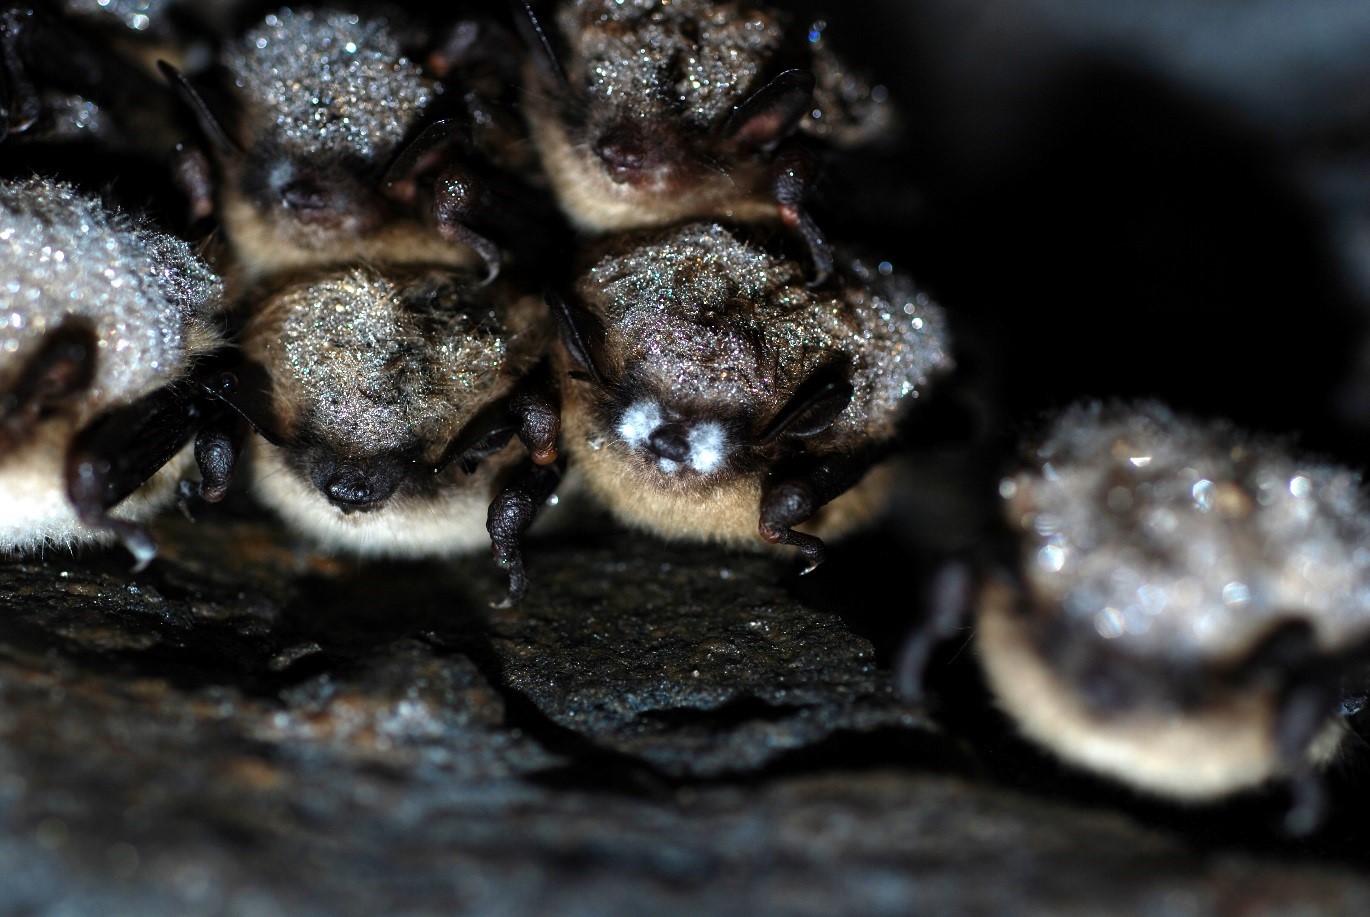 bats with white nose syndrome